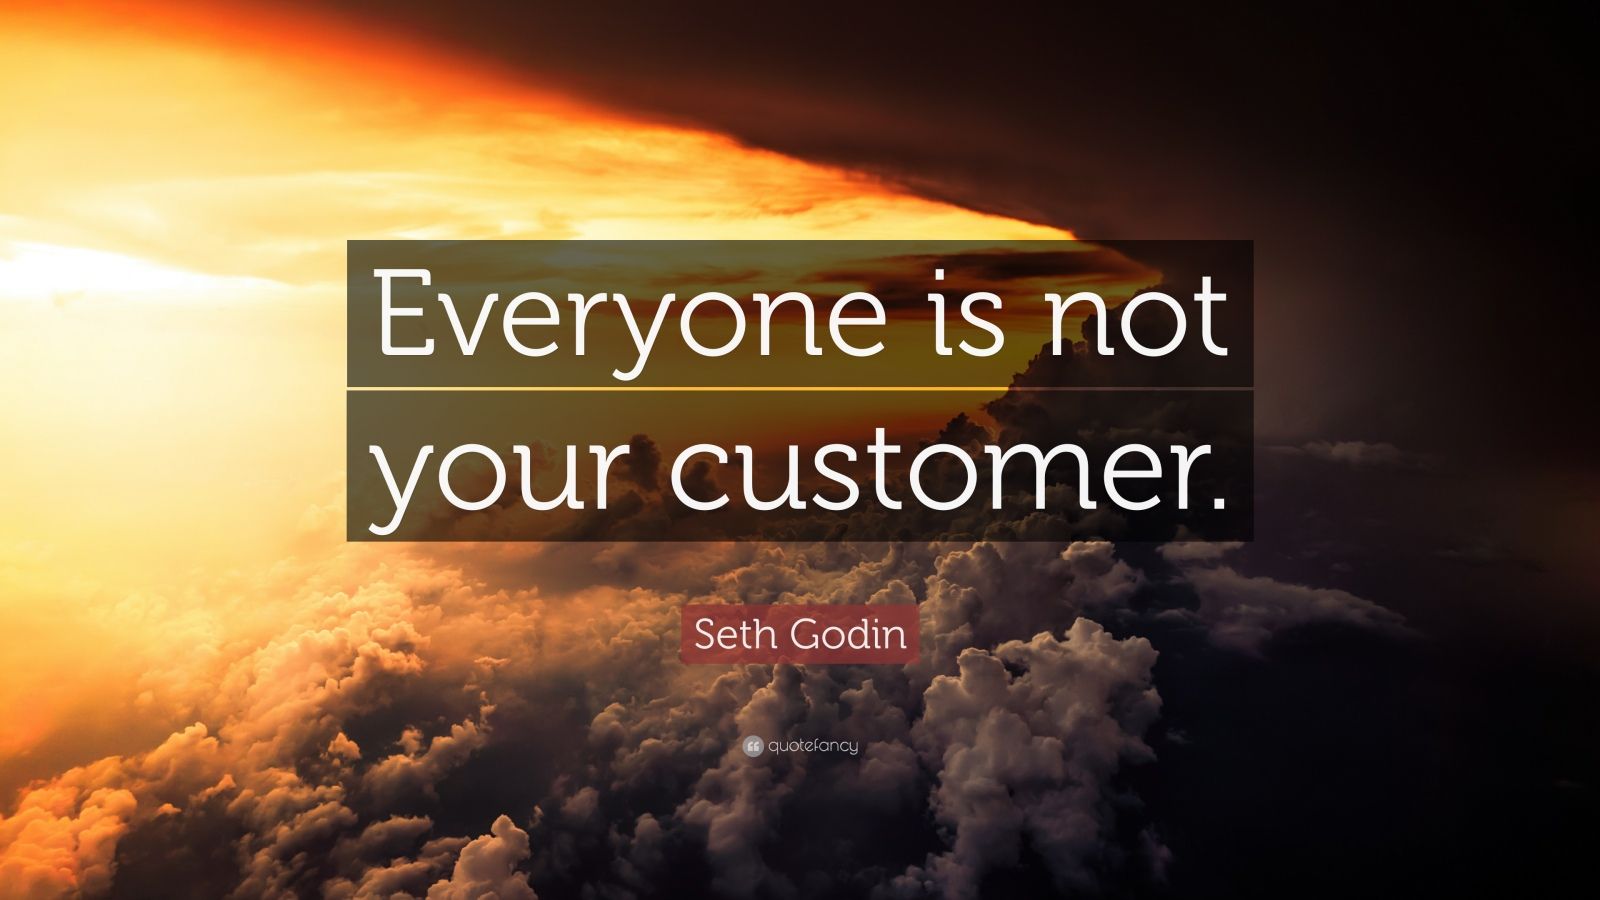 Seth Godin Quote: "Everyone is not your customer." (12 wallpapers) - Quotefancy